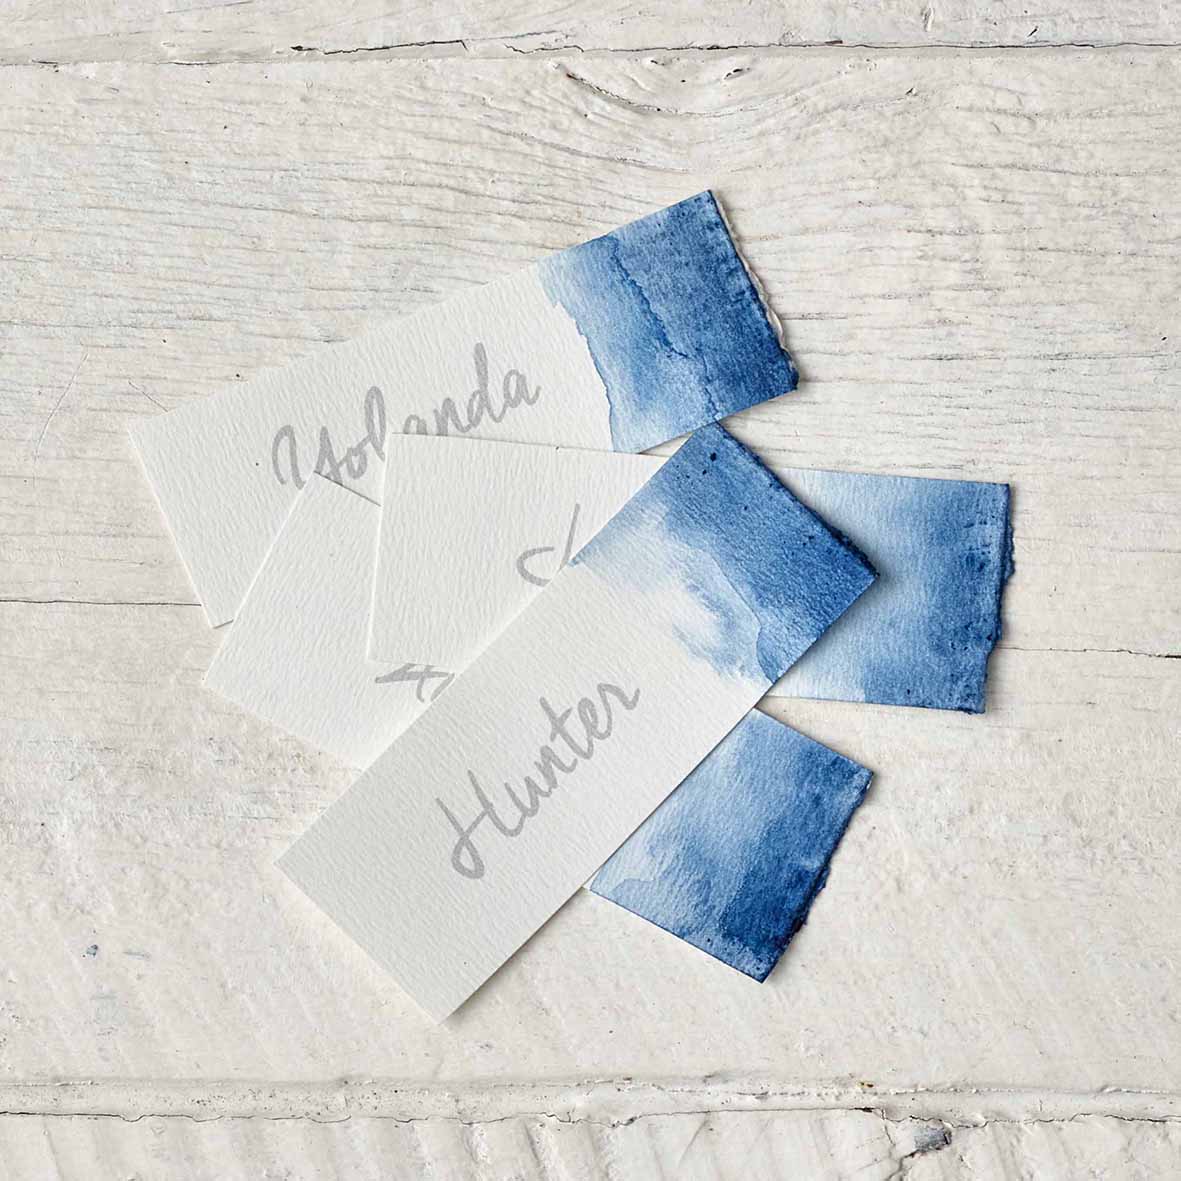 Watercolour gift tags